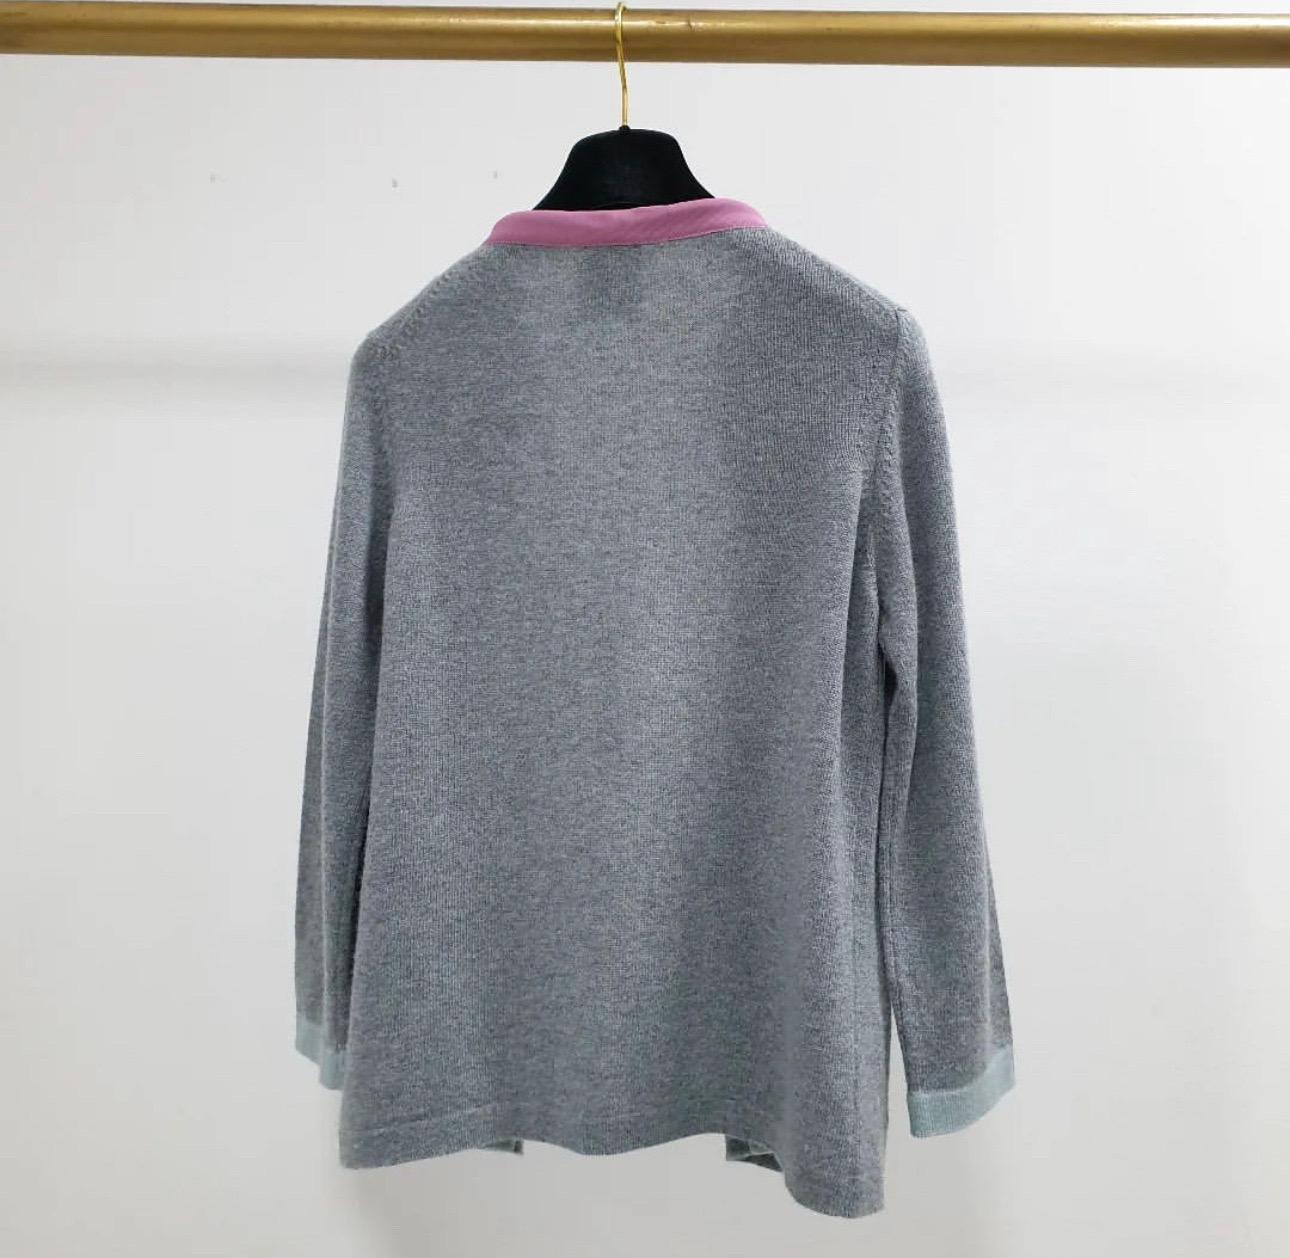 Chanel  knitwear for women. 
Grey Cashmere. 
Size 36 FR. 
Very good used condition. 